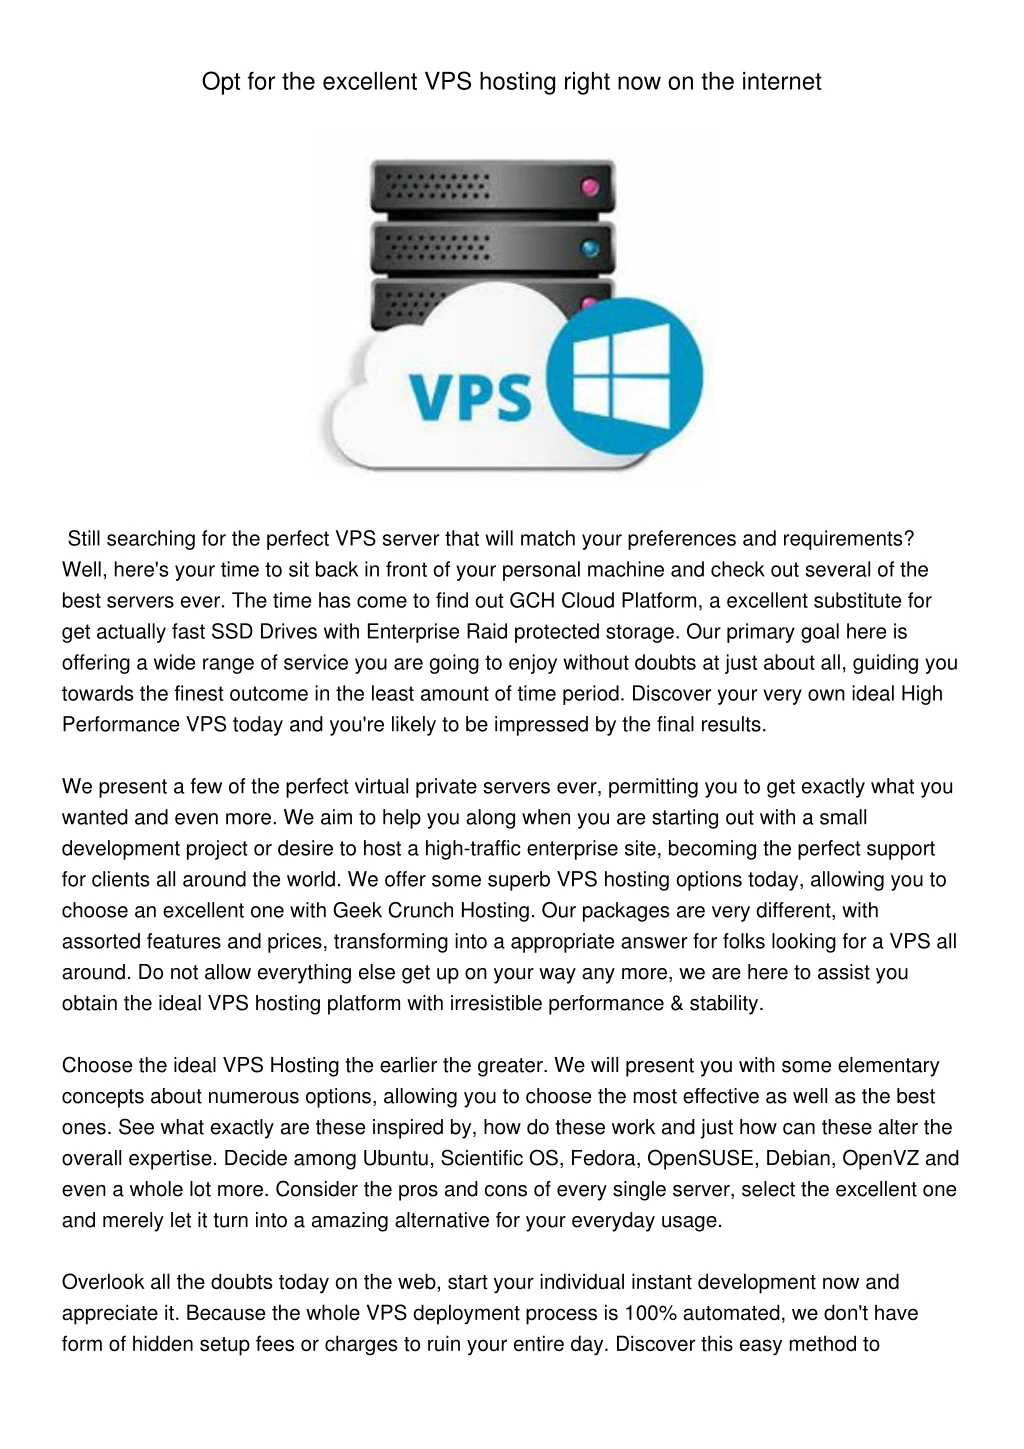 opt for the excellent vps hosting right n.